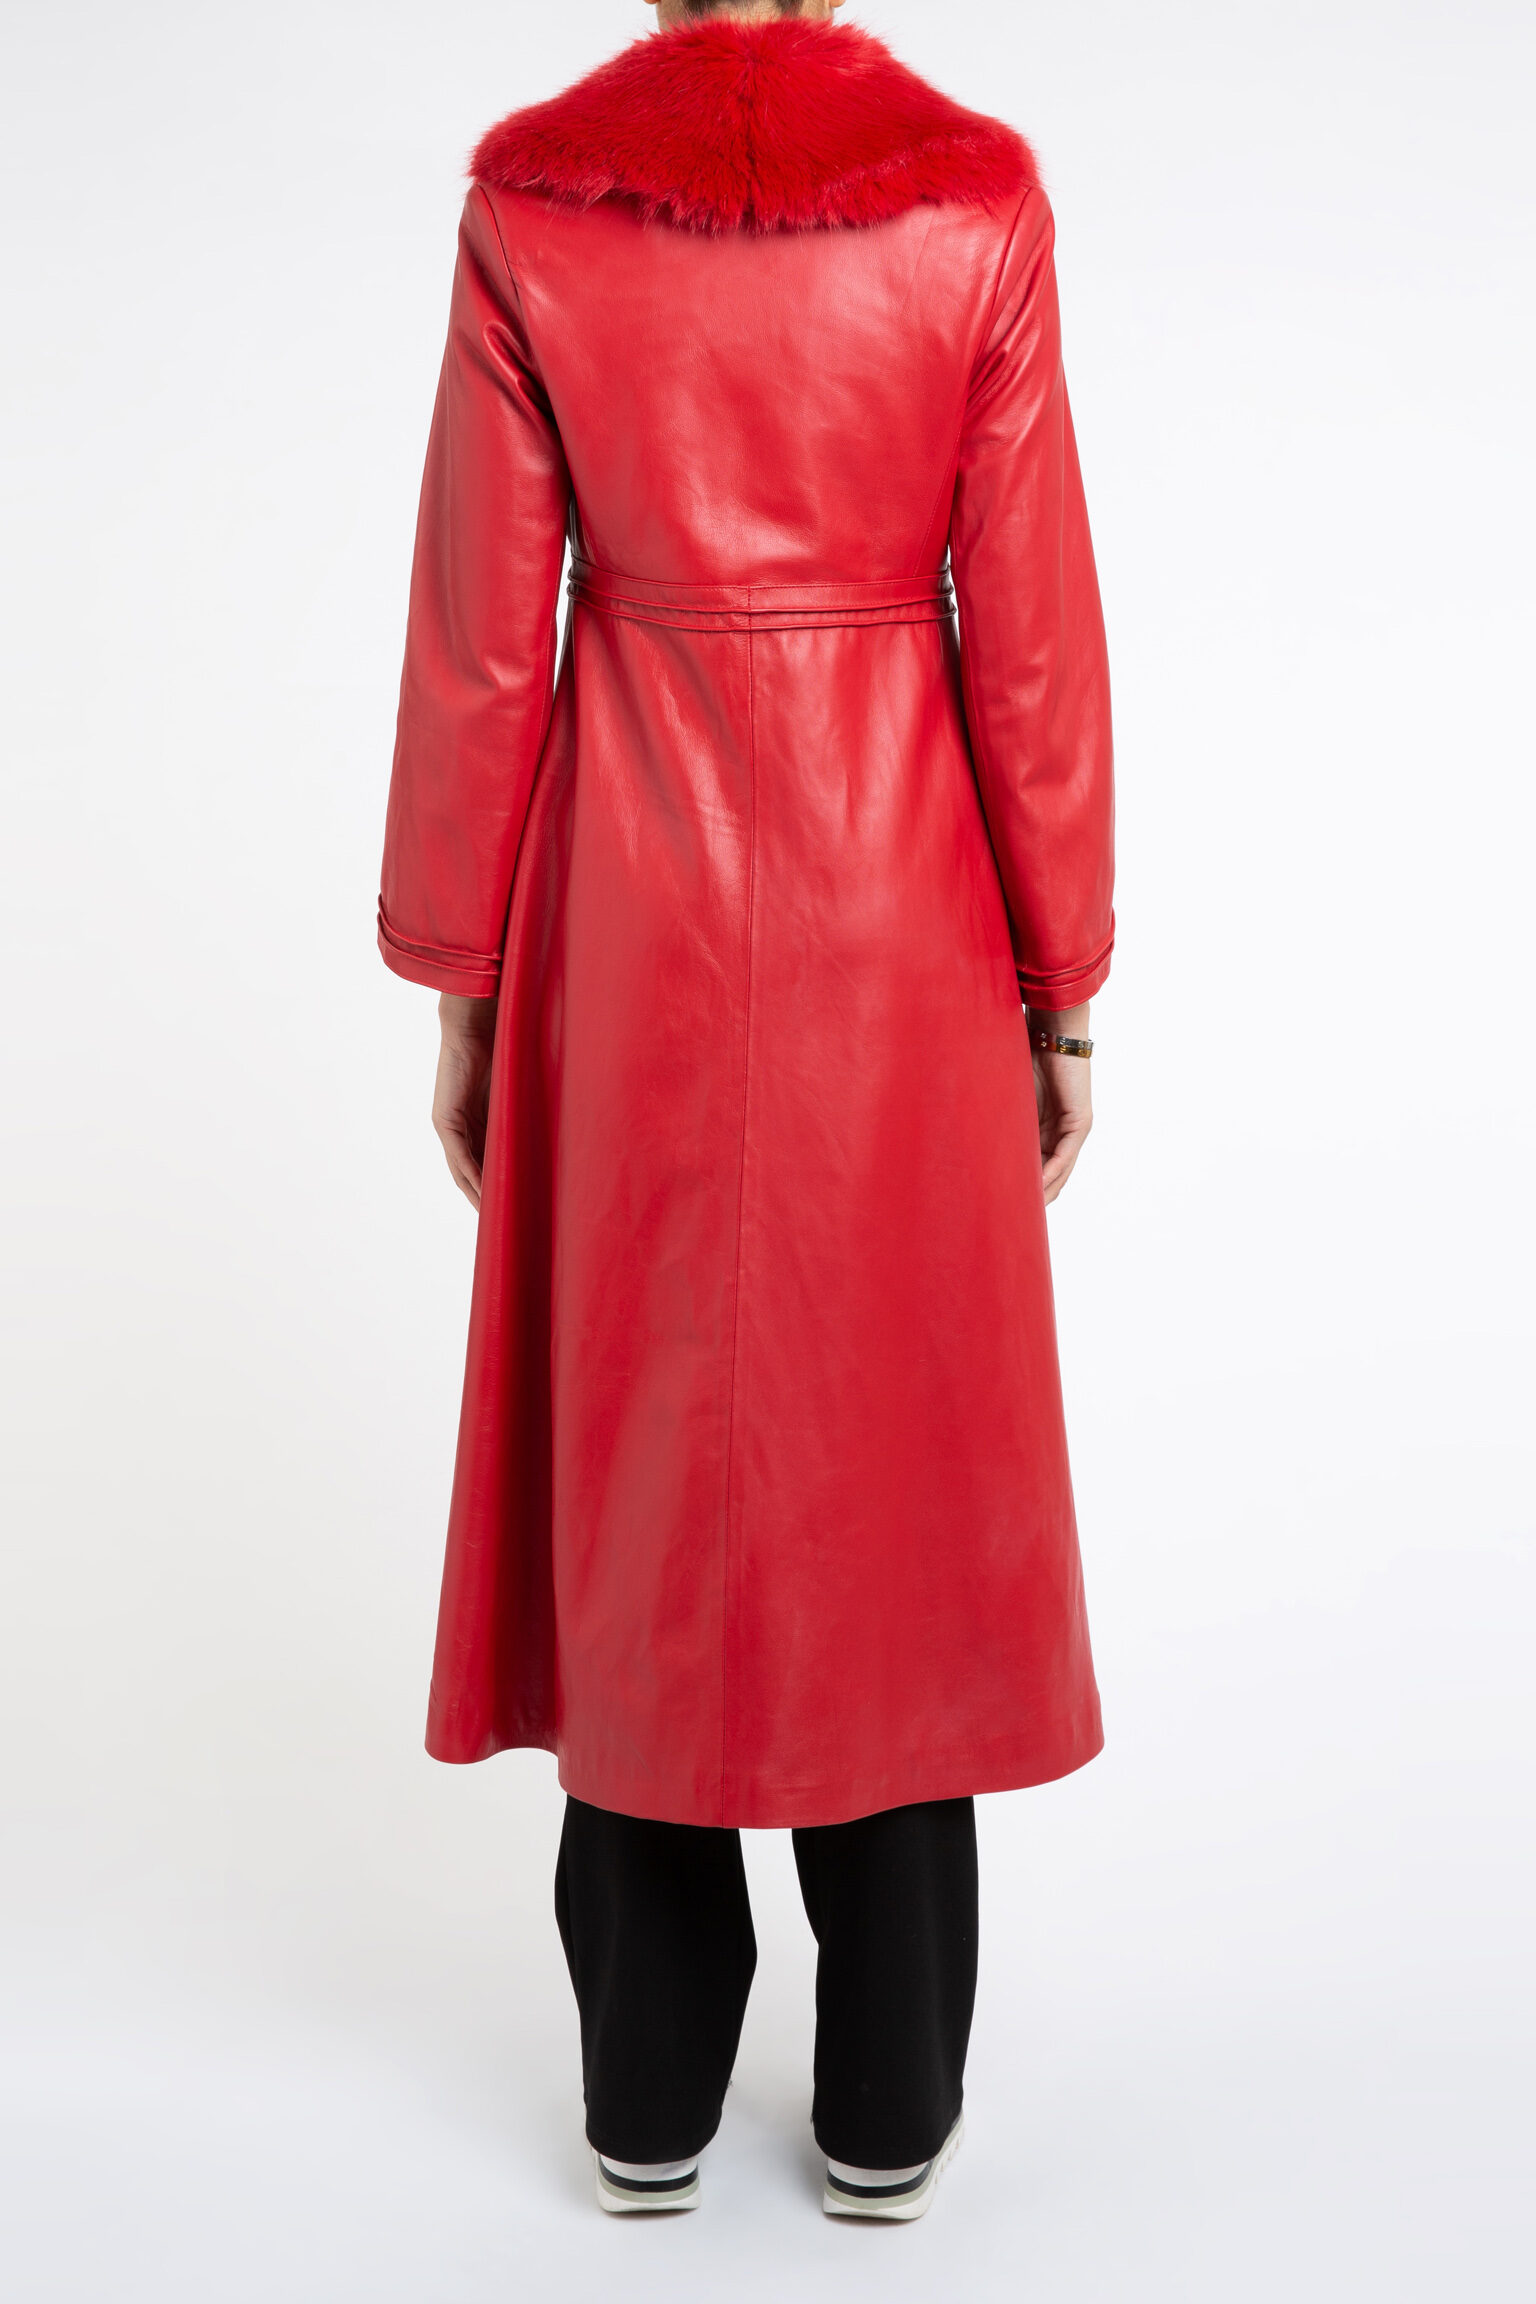 Edward Leather Trench Coat in Red